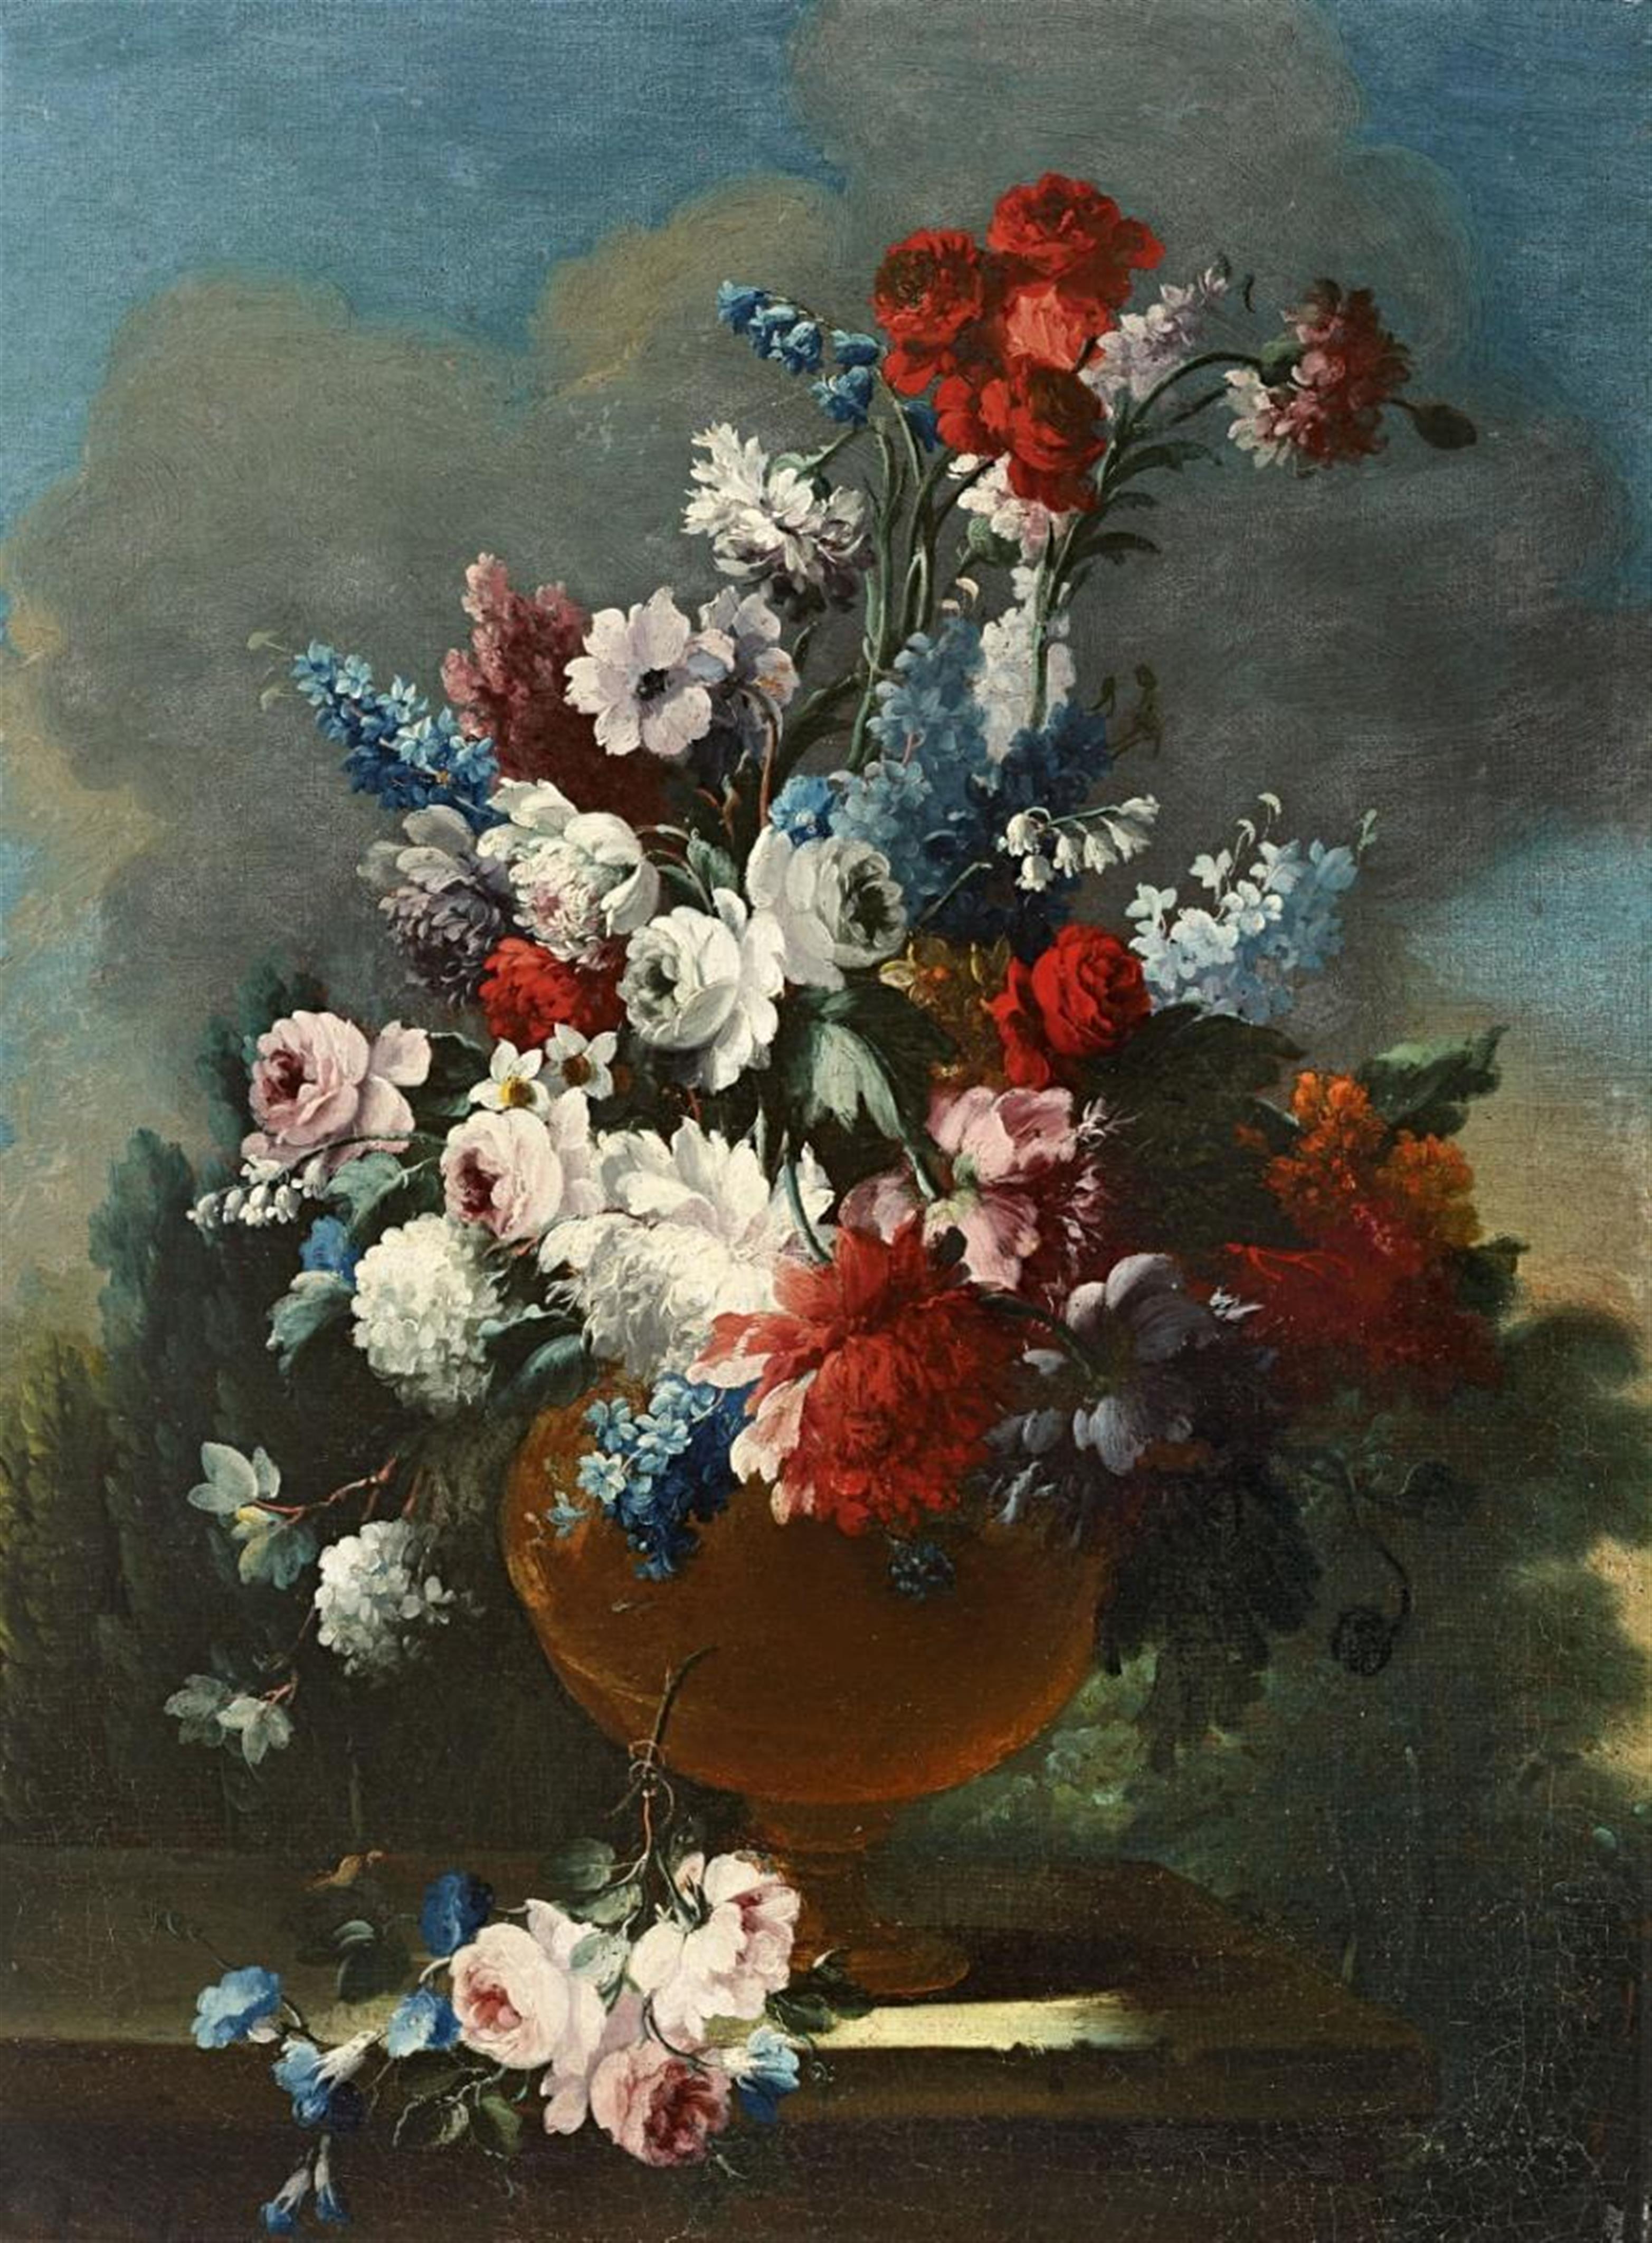 French School, 18th century - STILL LIFE WITH ROSES,PEONIES, LILLIES OF THE VALLEY, LARKSPUR AND SNOWBALL BUSH - image-1